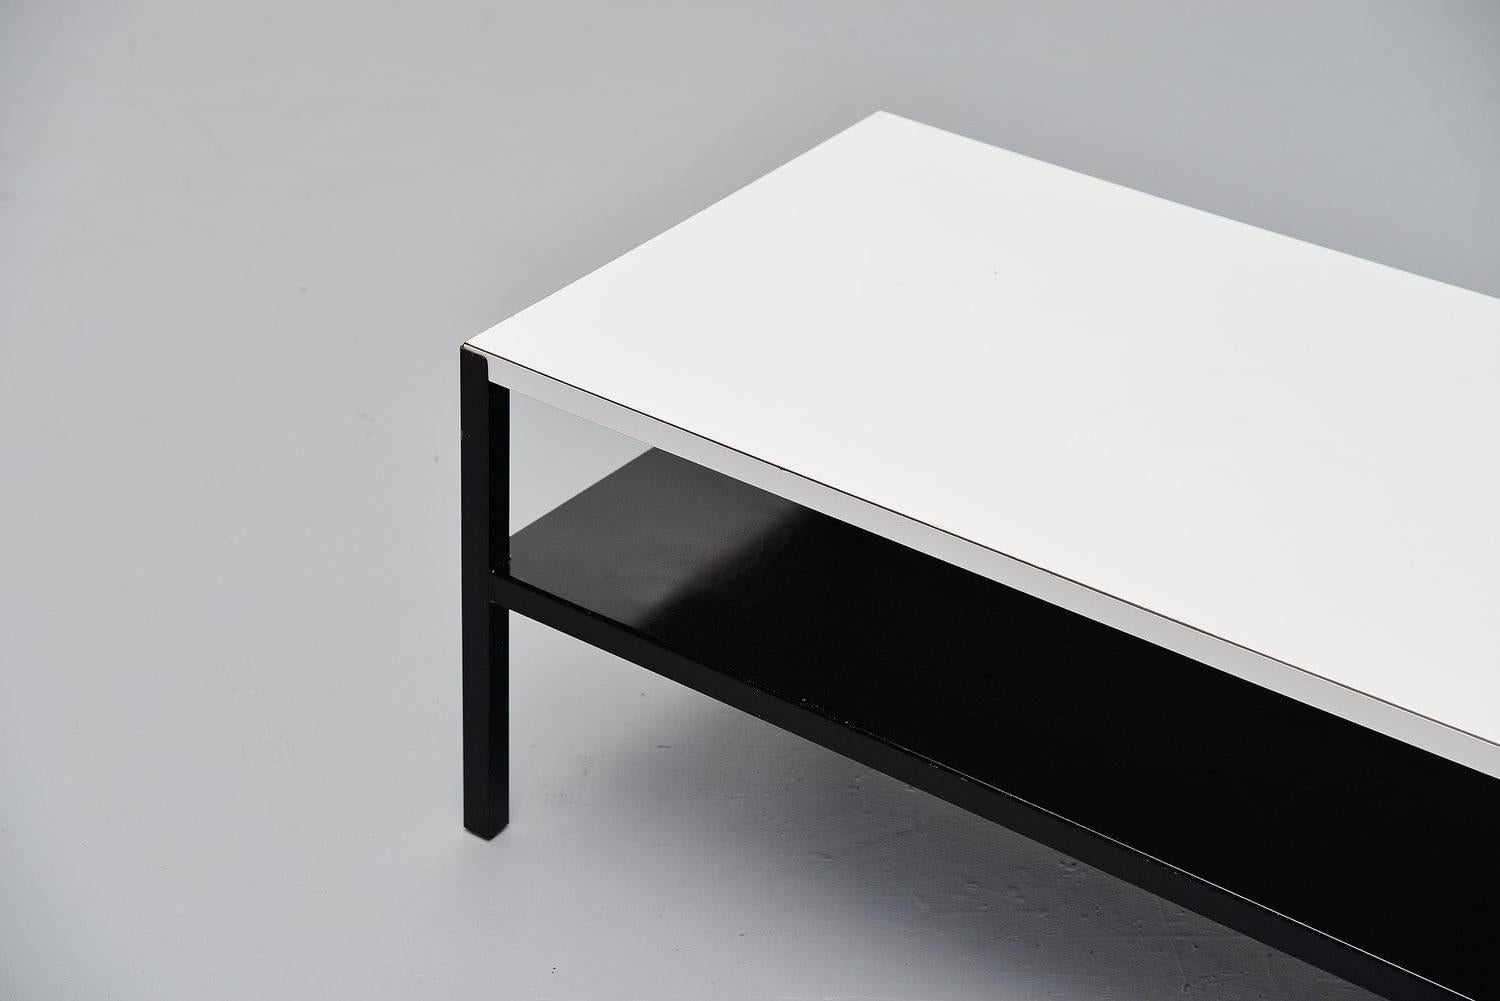 Very nice Industrial coffee table designed by Wim Rietveld for Ahrend de Cirkel, Holland, 1960. This table was model Regal, designed in 1960 and it has a black lacquered metal frame with Ahrend stamp on it. The top is made of white laminated wood.